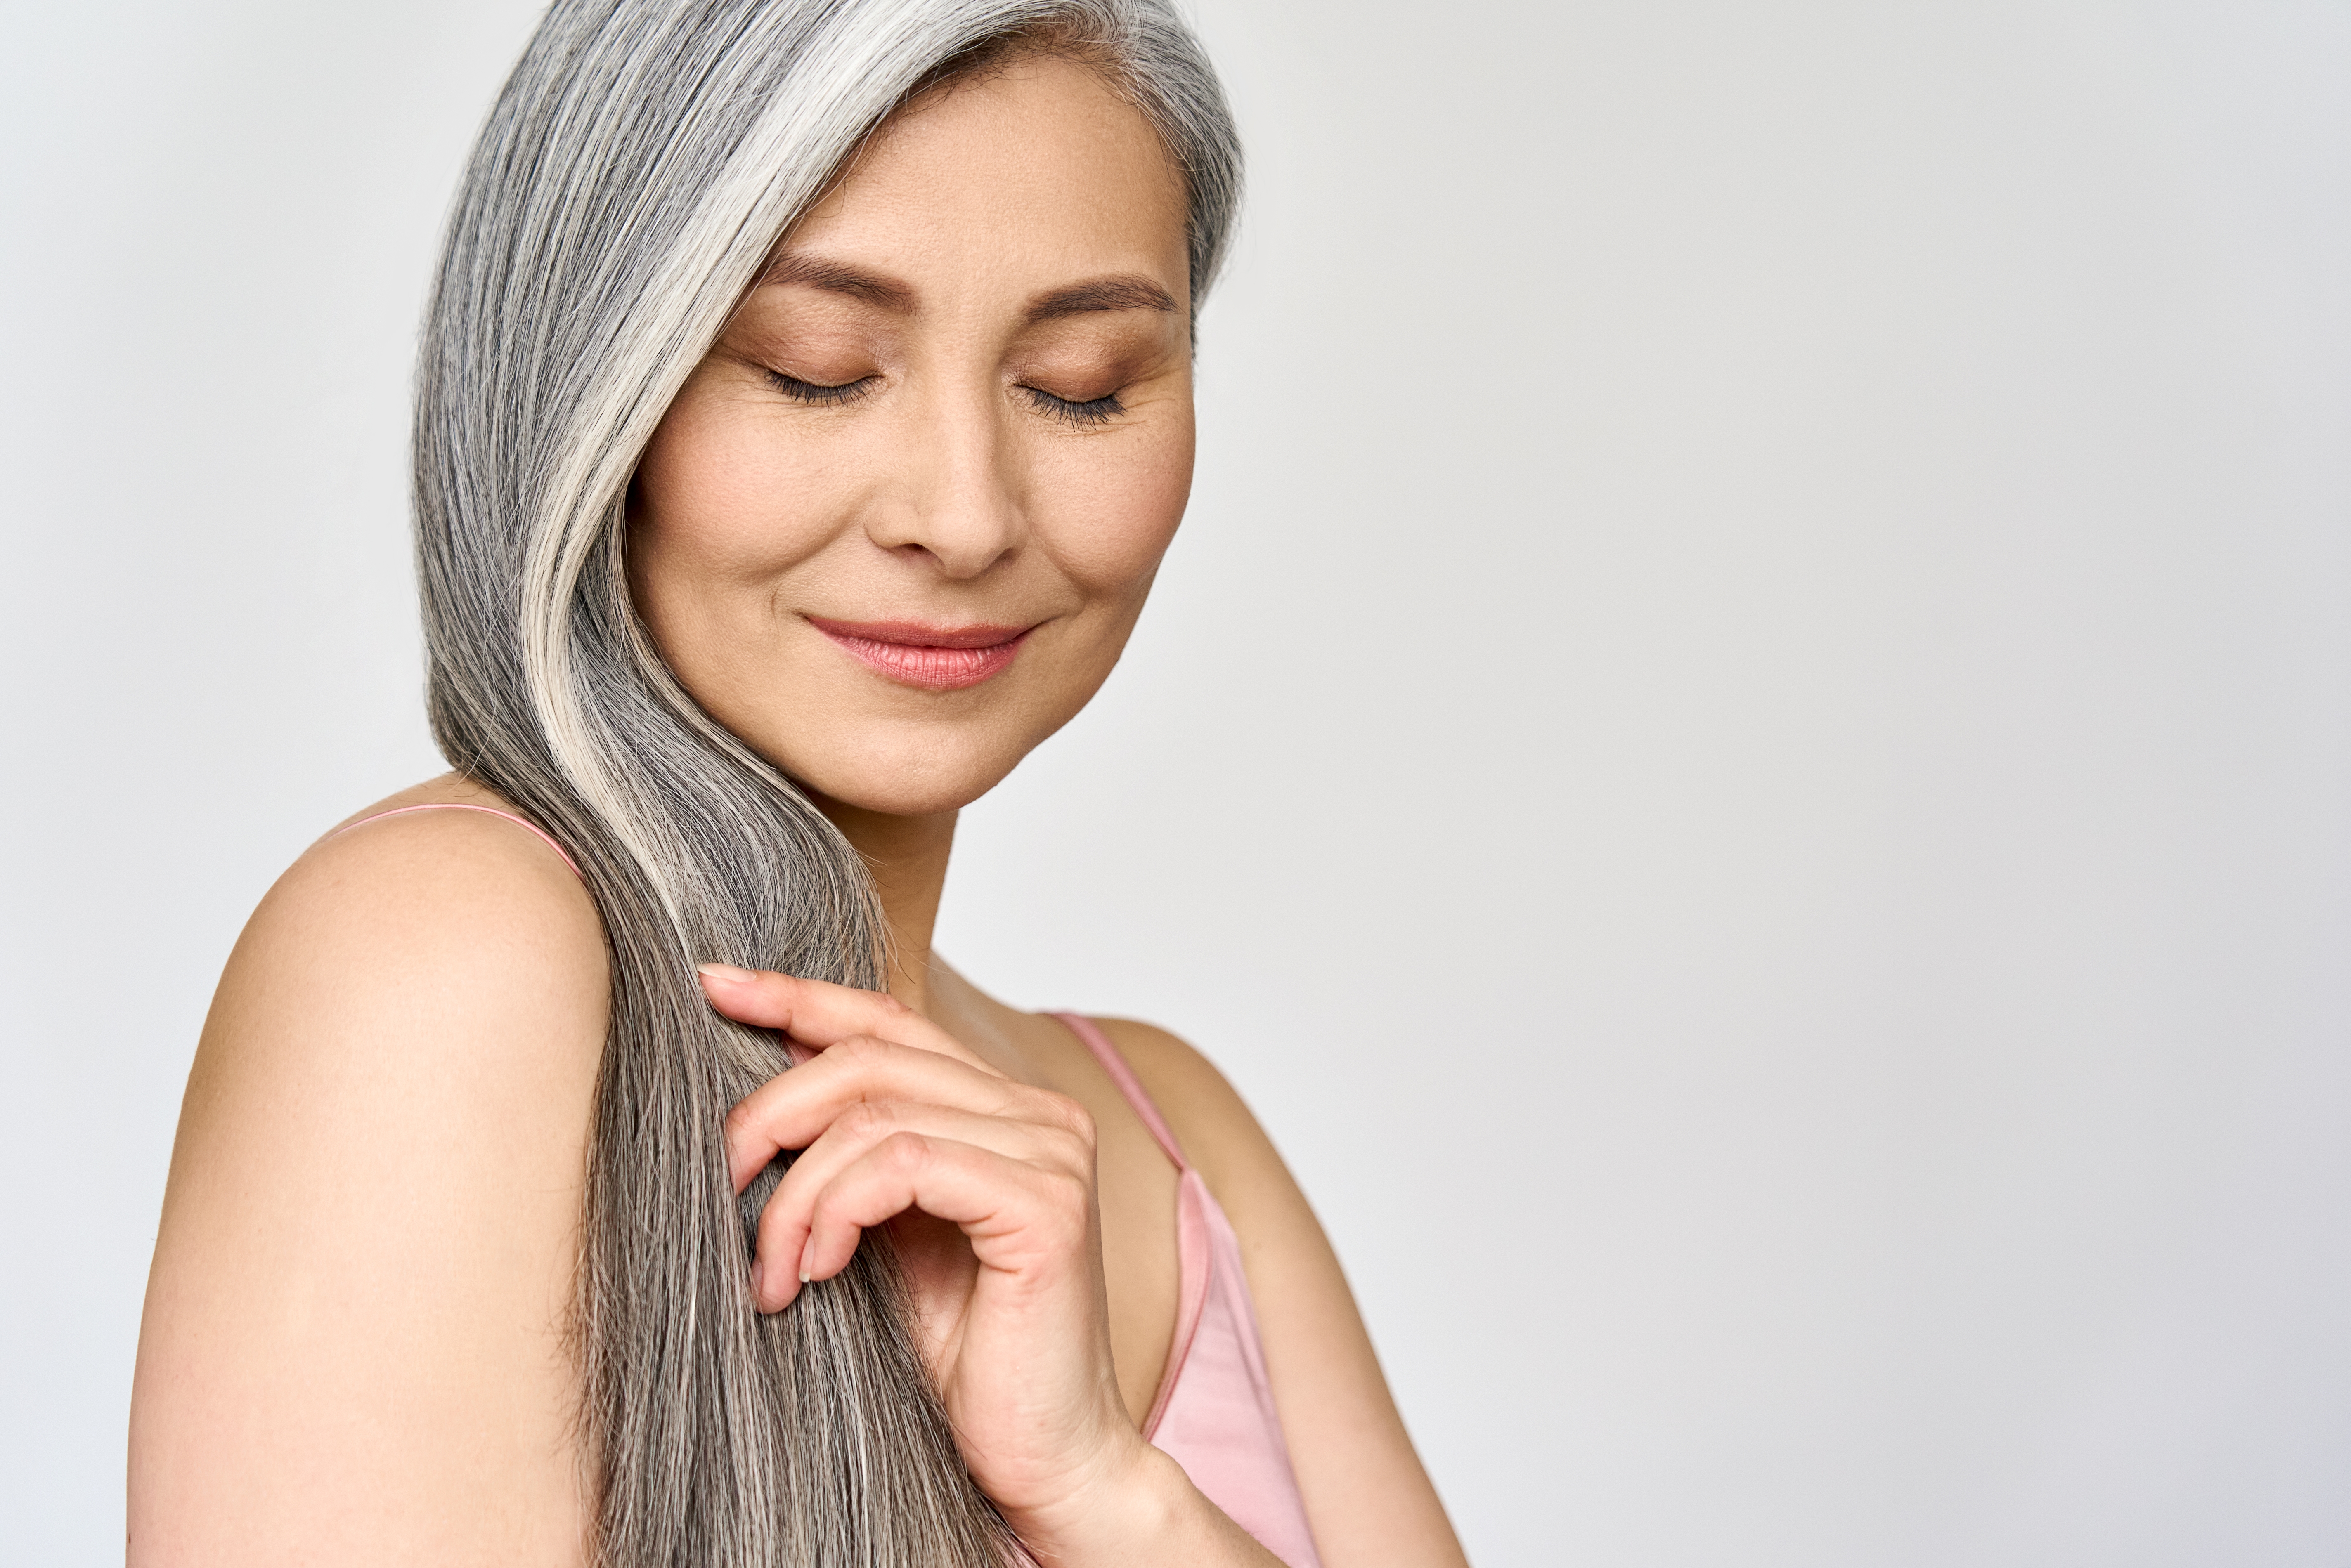 A gray-haired woman | Source: Shutterstock